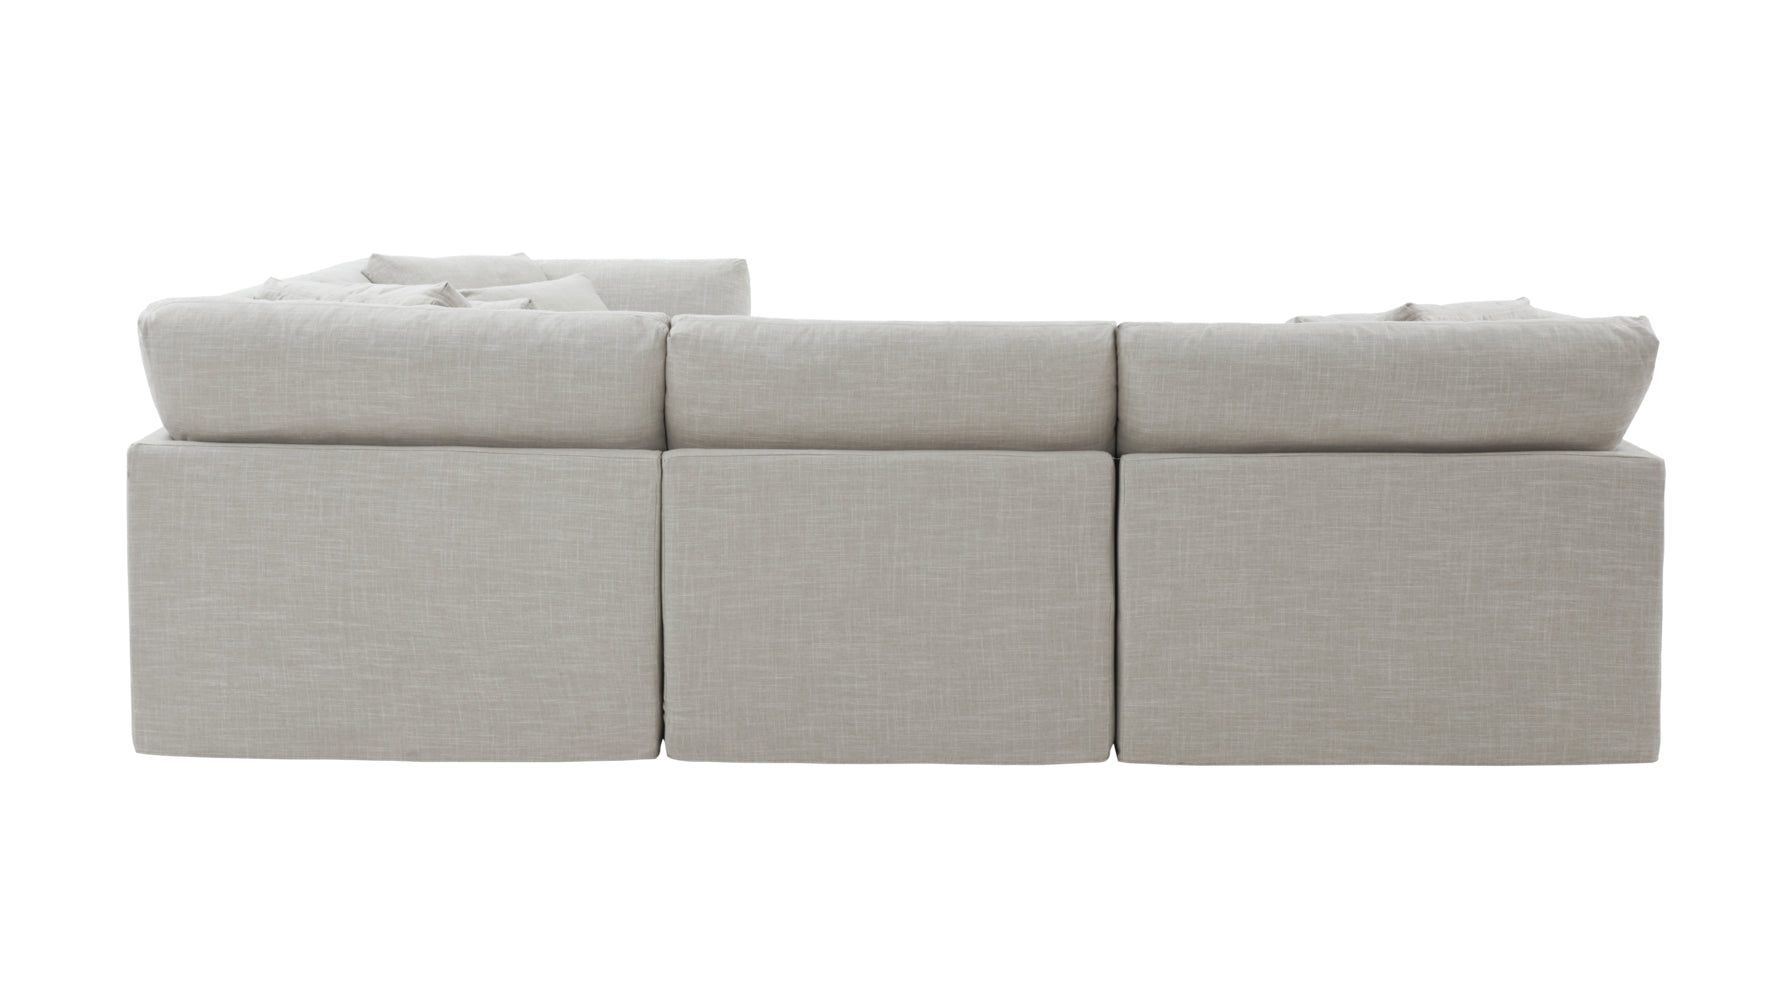 Get Together™ 4-Piece Modular Sectional Closed, Large, Light Pebble - Image 6